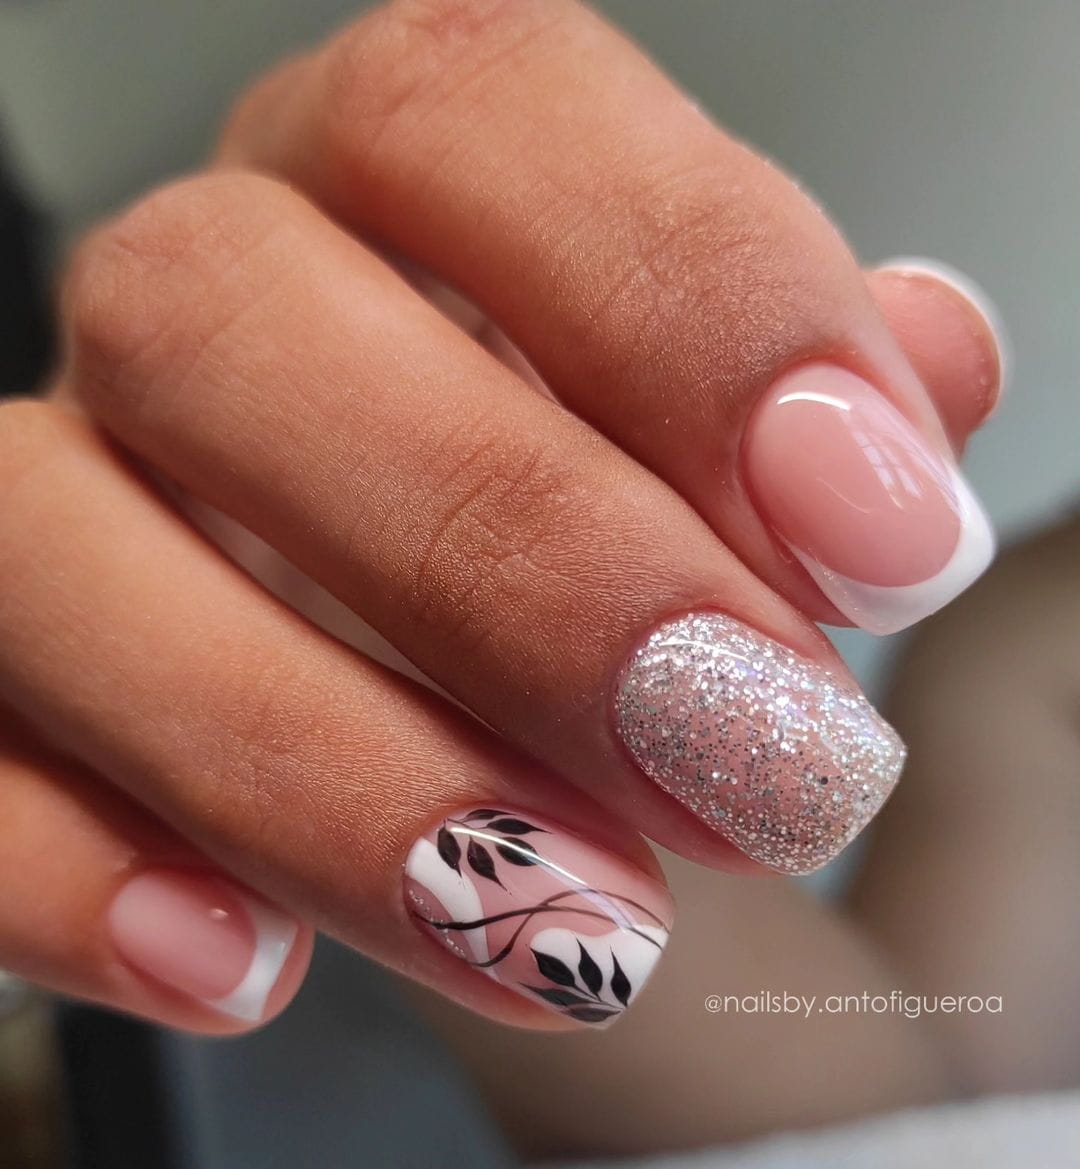 100 Pretty Spring Nail Designs To Try This Year images 35